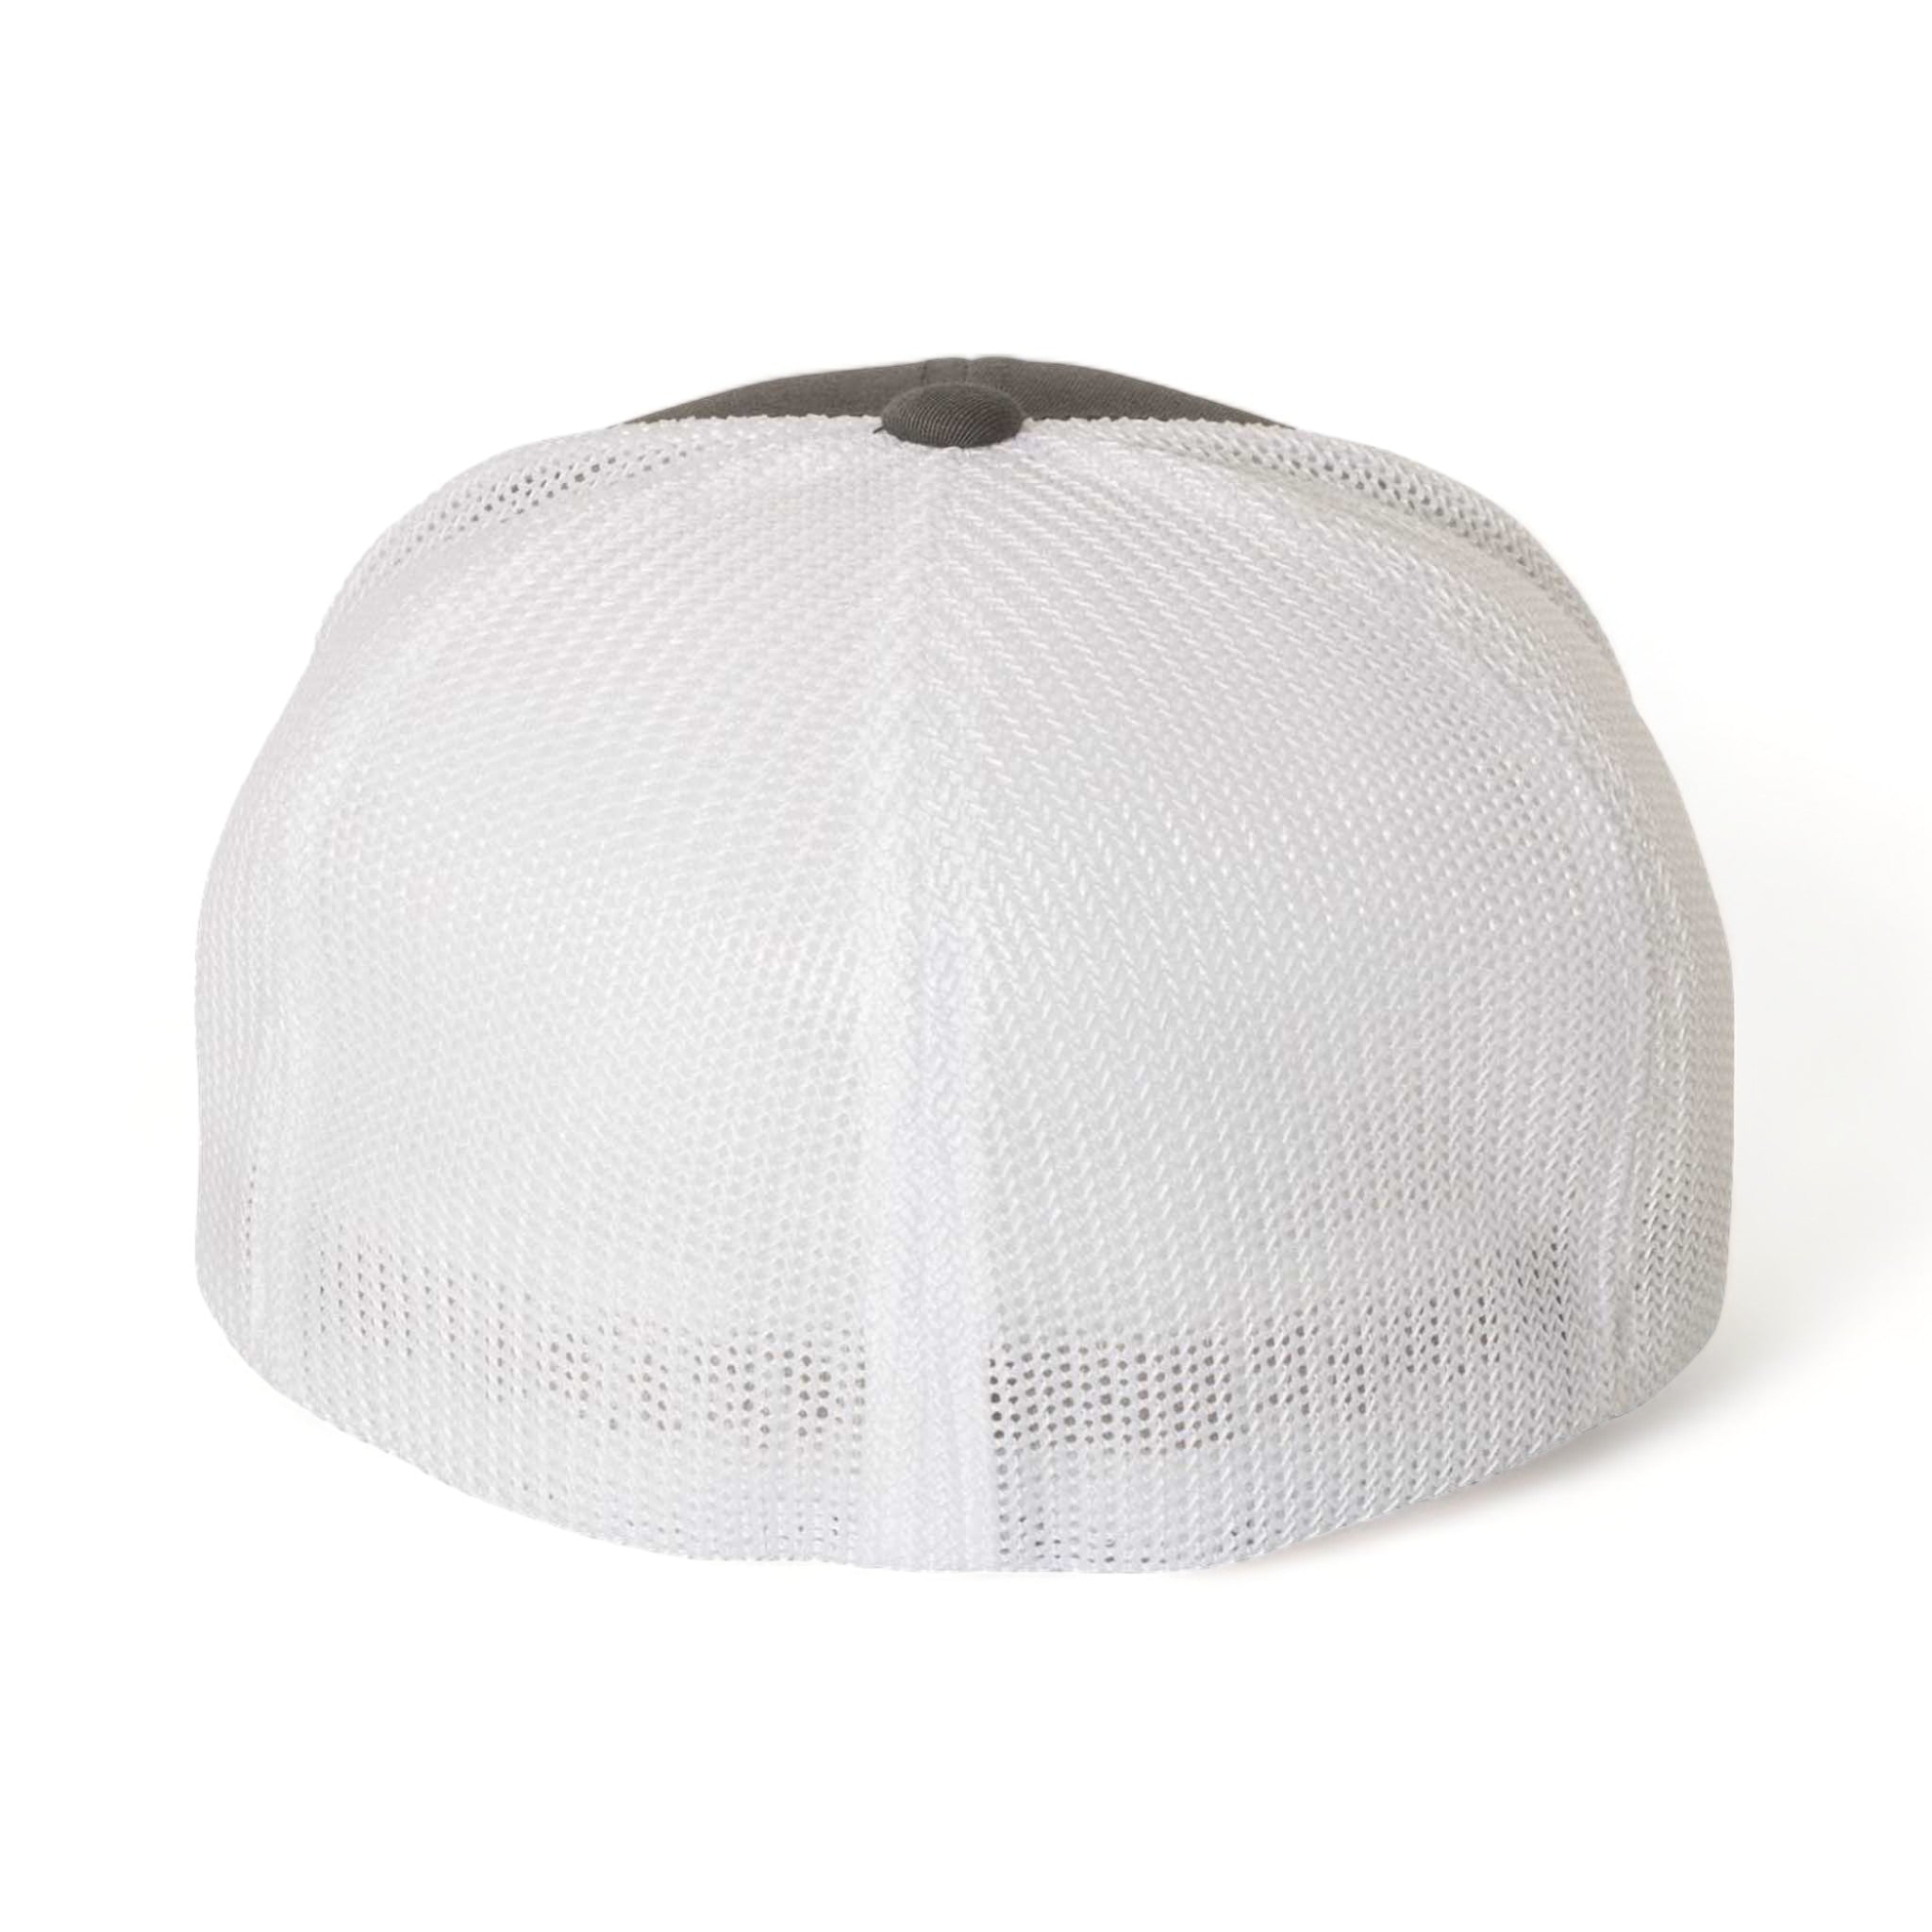 Back view of Flexfit 6511 custom hat in charcoal and white